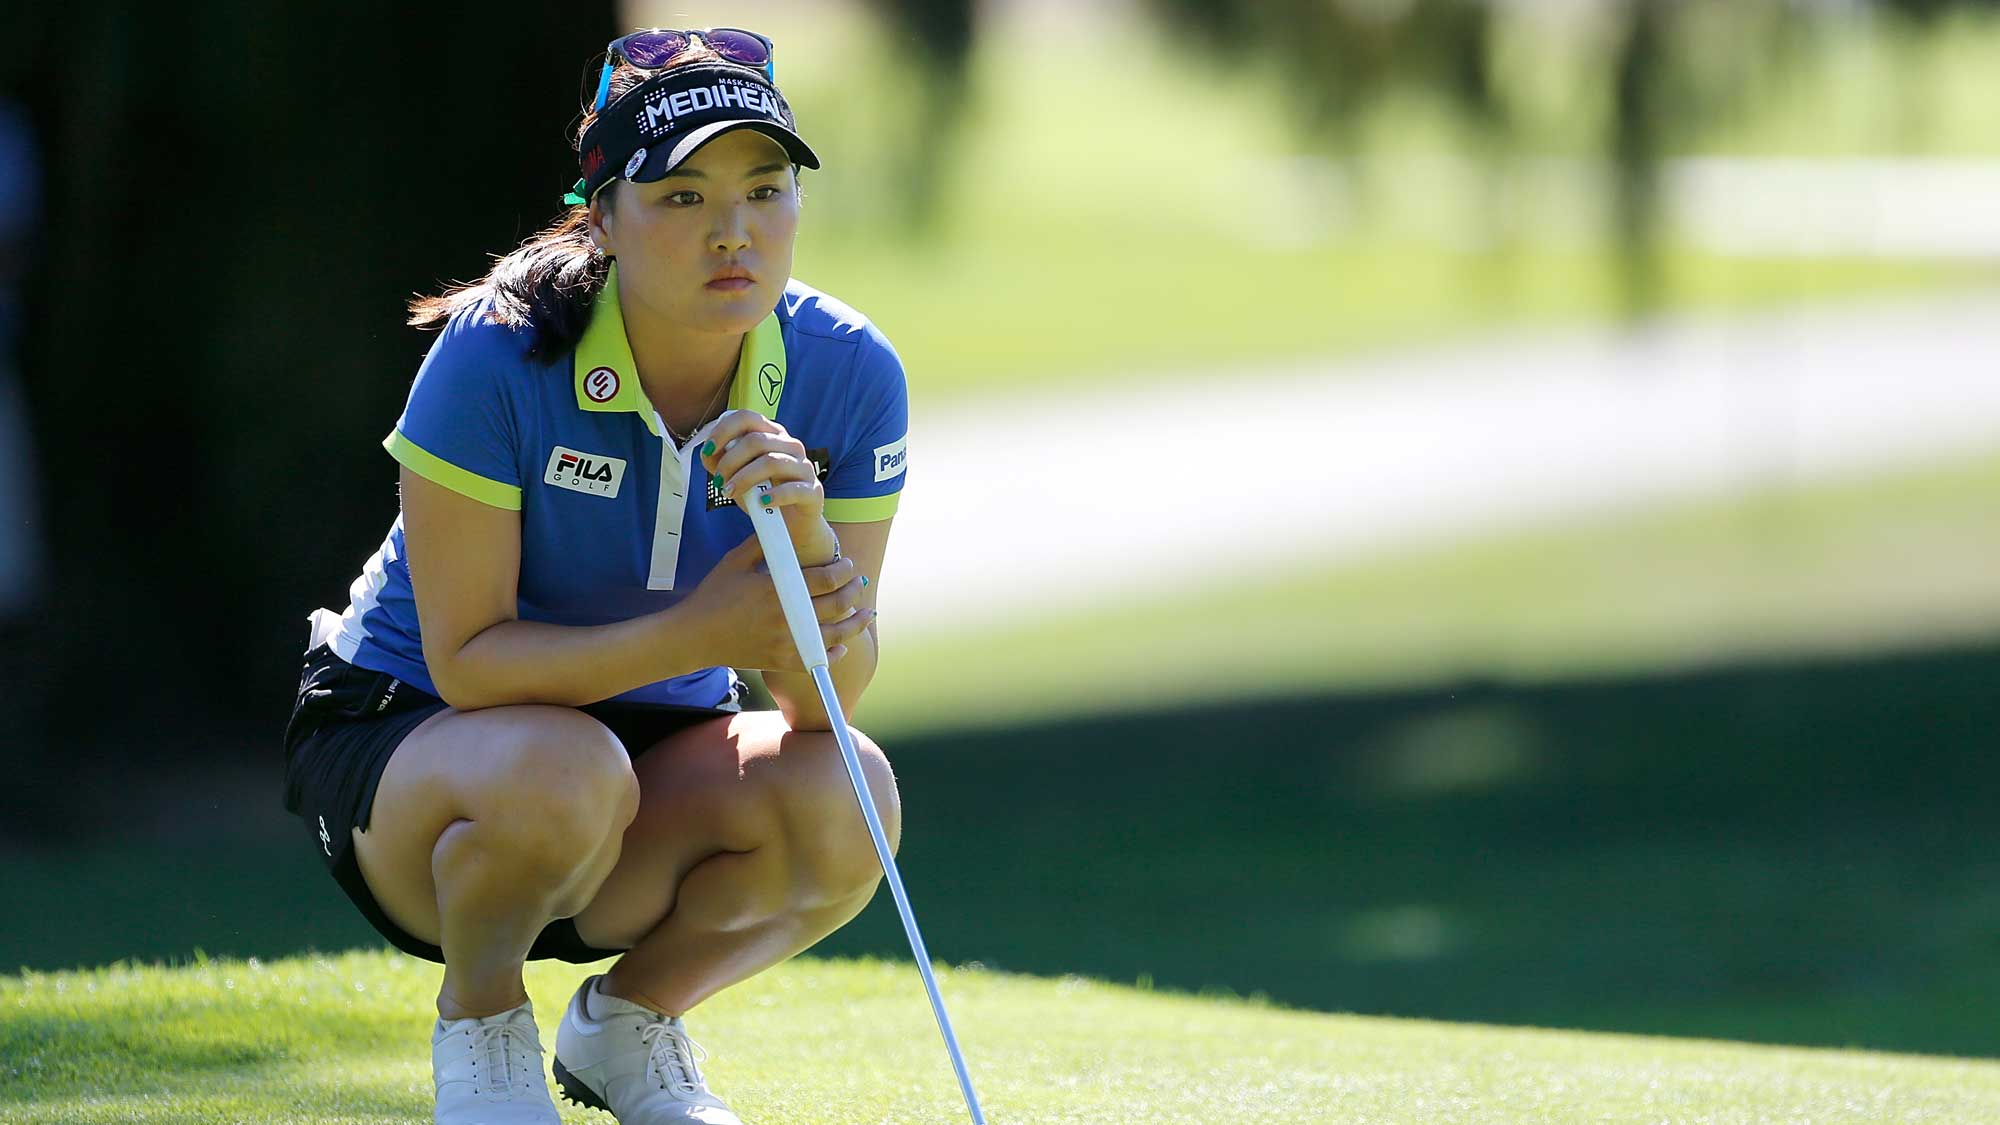 So Yeon Ryu of South Korea lines up a putt on the 9th hole during the first round of the LPGA Cambia Portland Classic